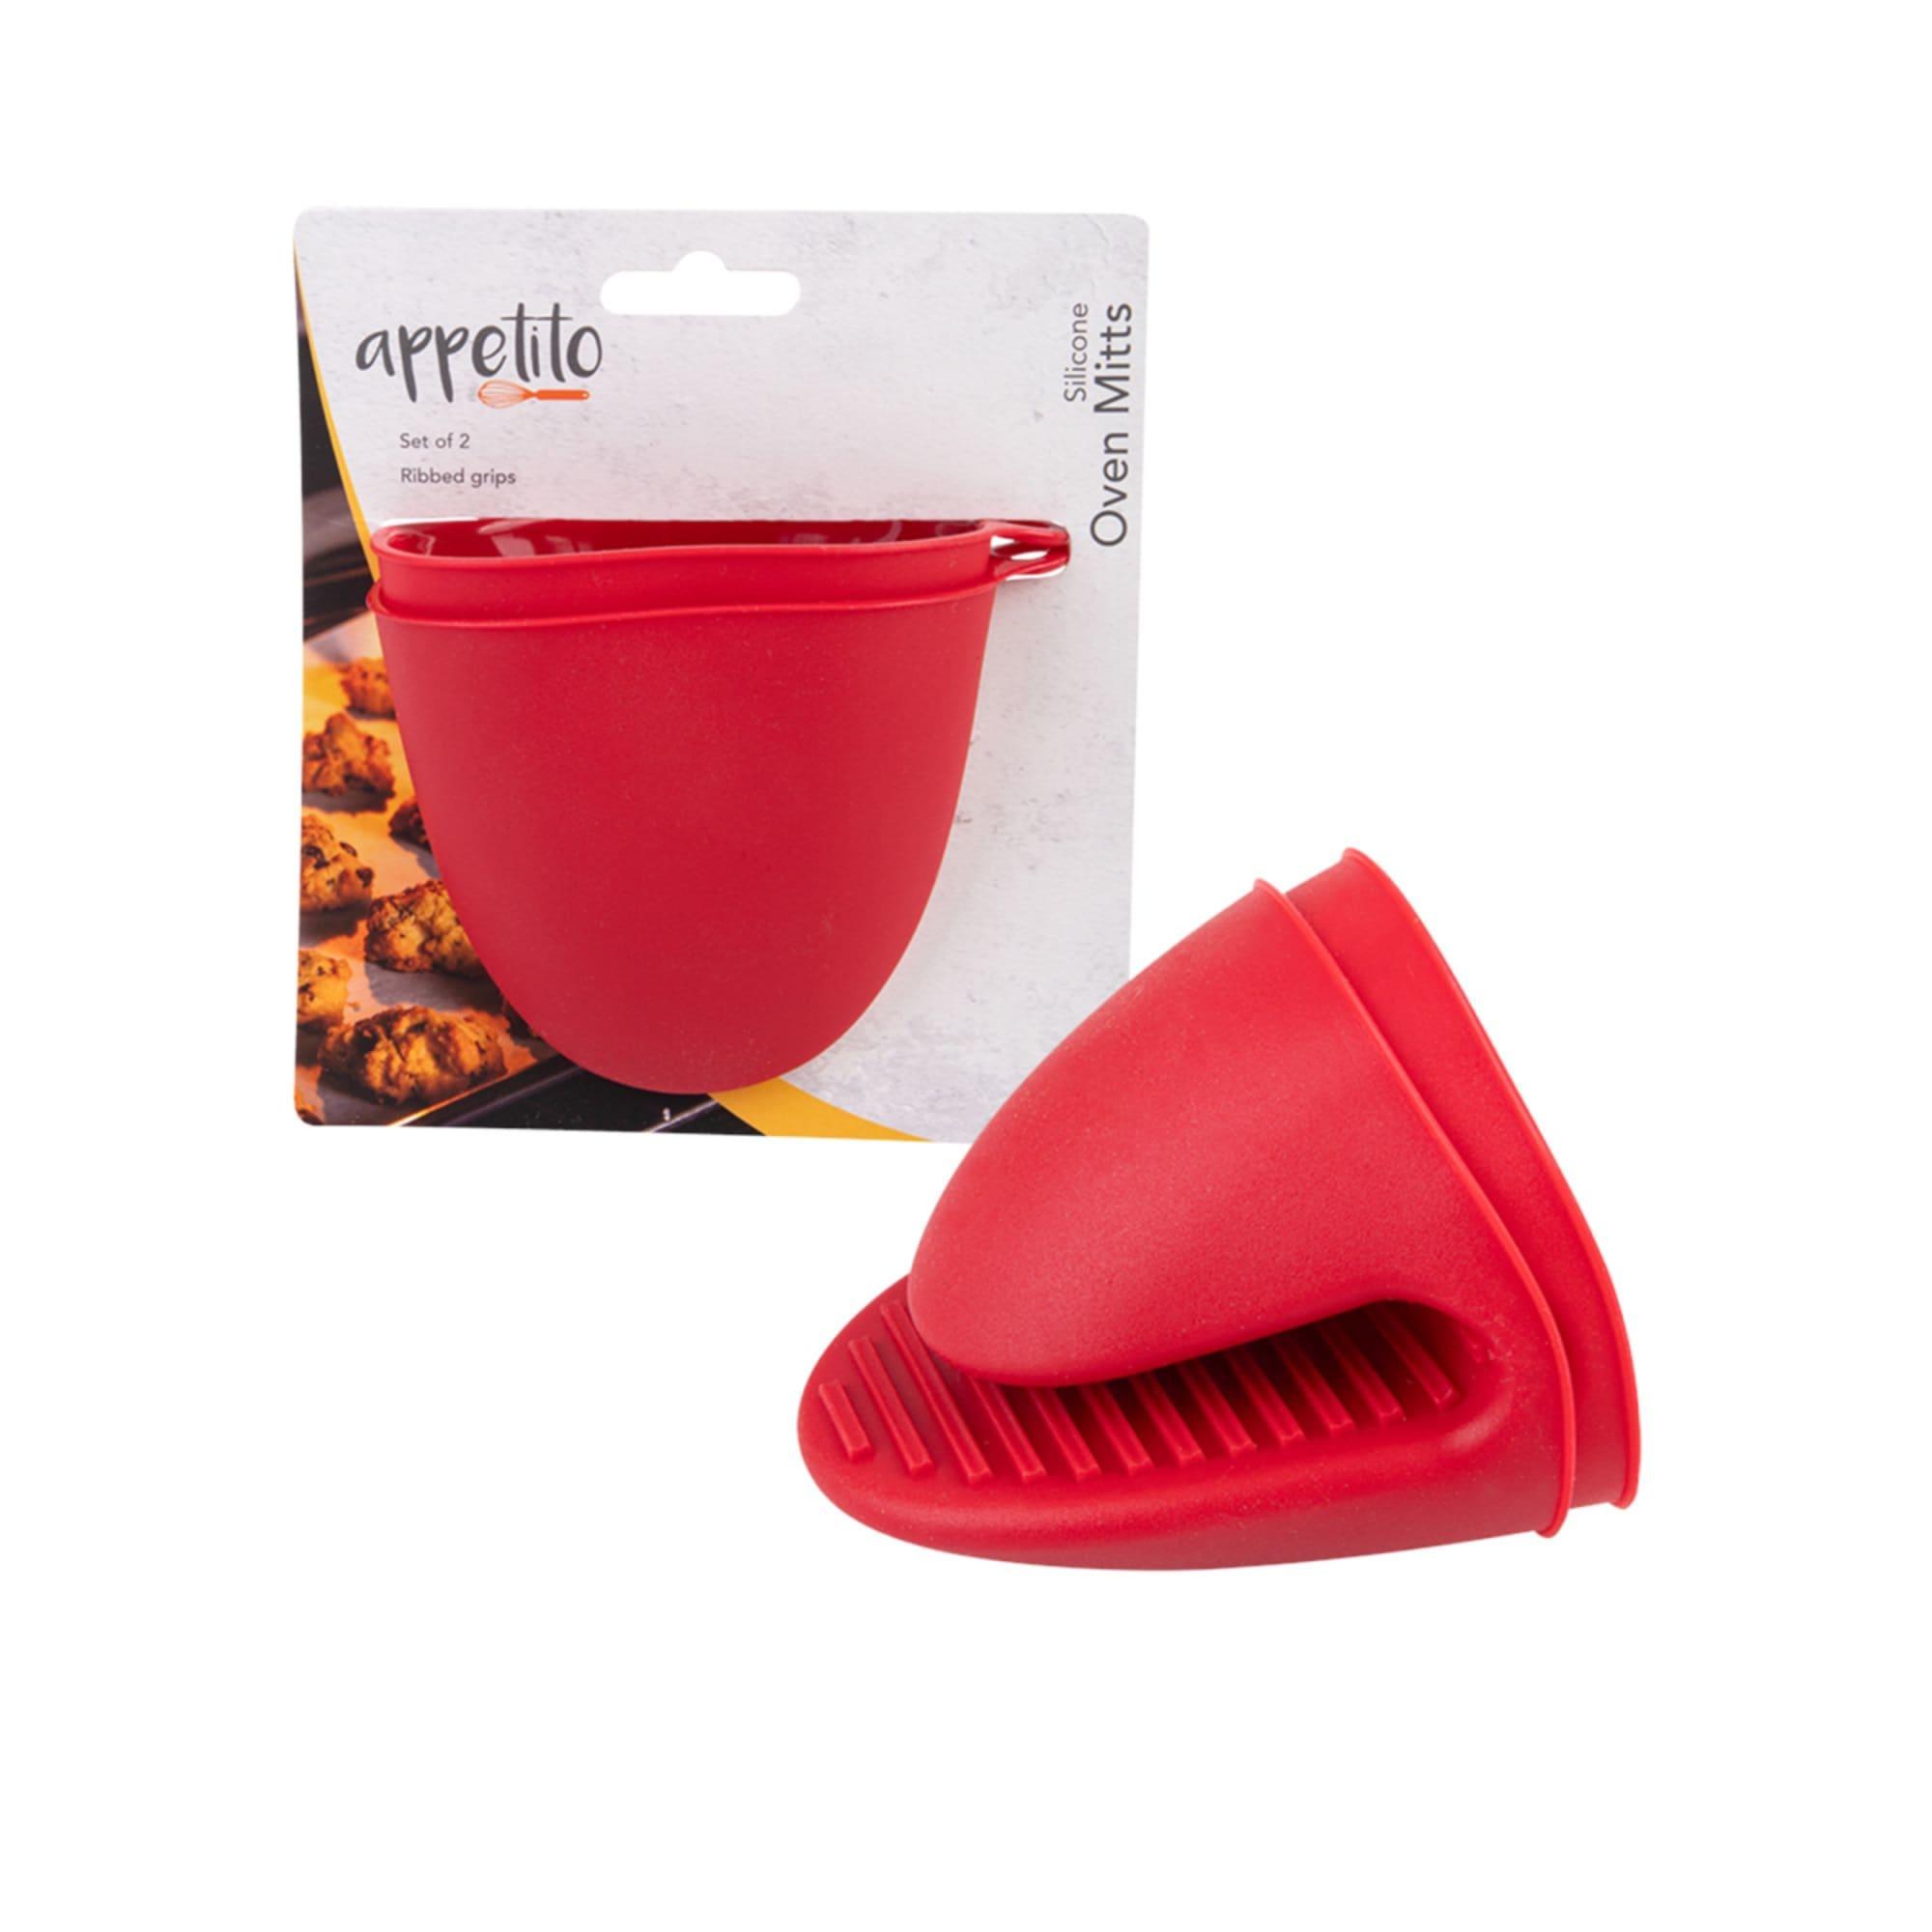 Appetito Silicone Oven Mitt Set of 2 Red Image 3